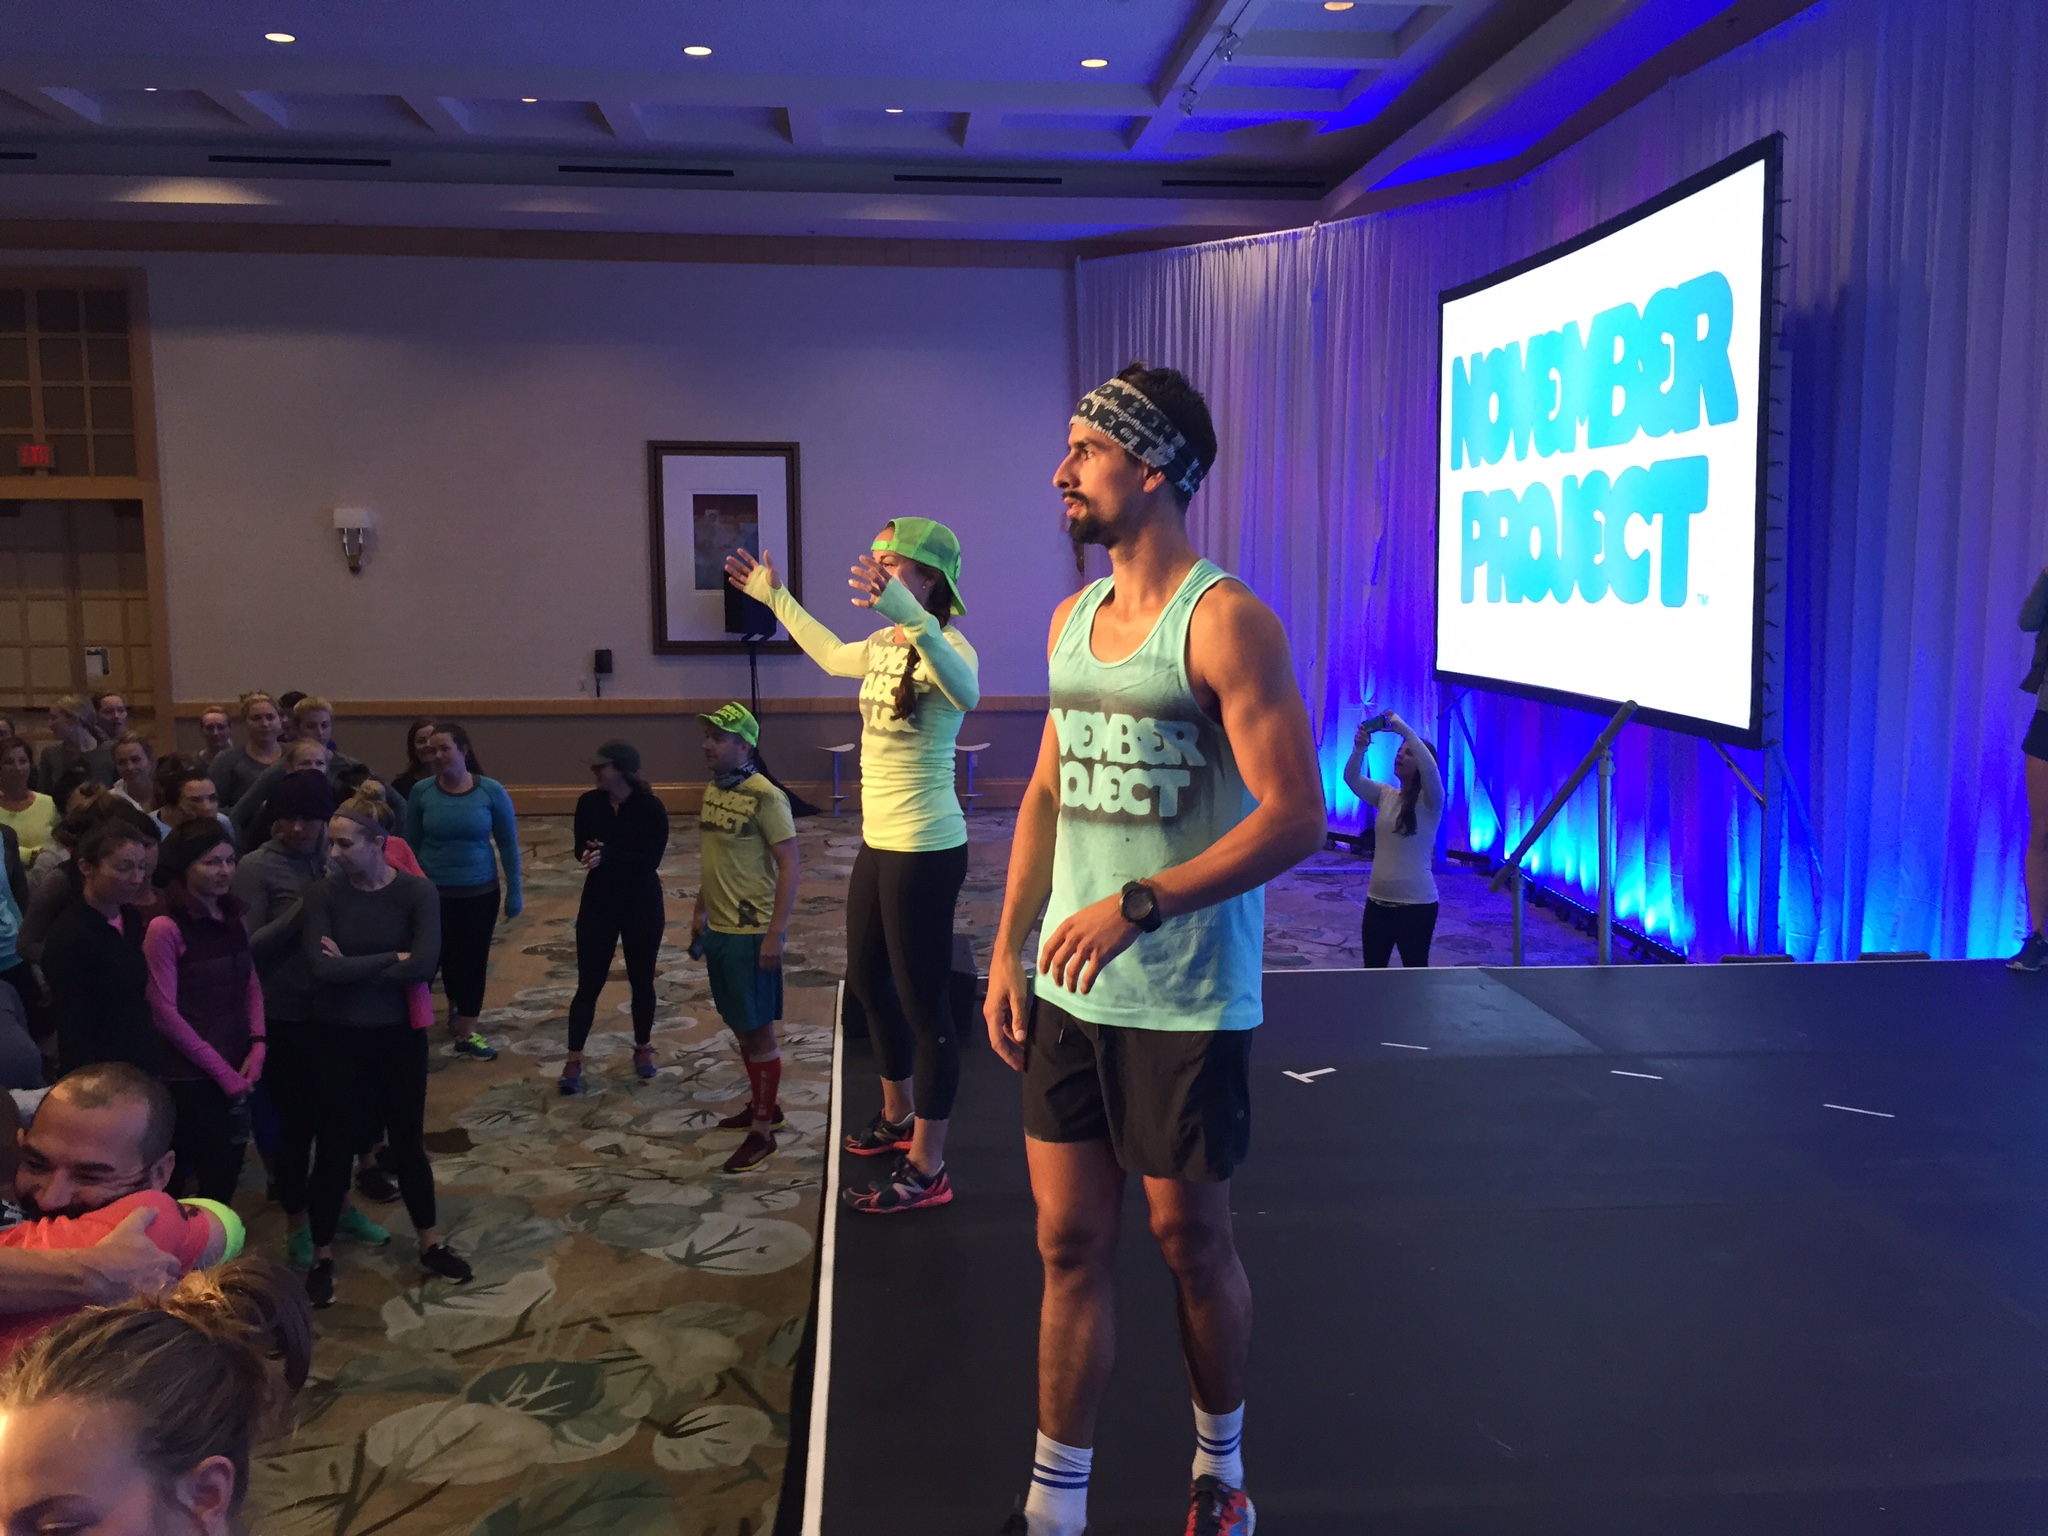   November Project -&nbsp;San Diego co-leaders and Lululemon Ambassadors, Lauren Padula and Angelo Neroni led a workout of more than 400 on Wednesday morning.  